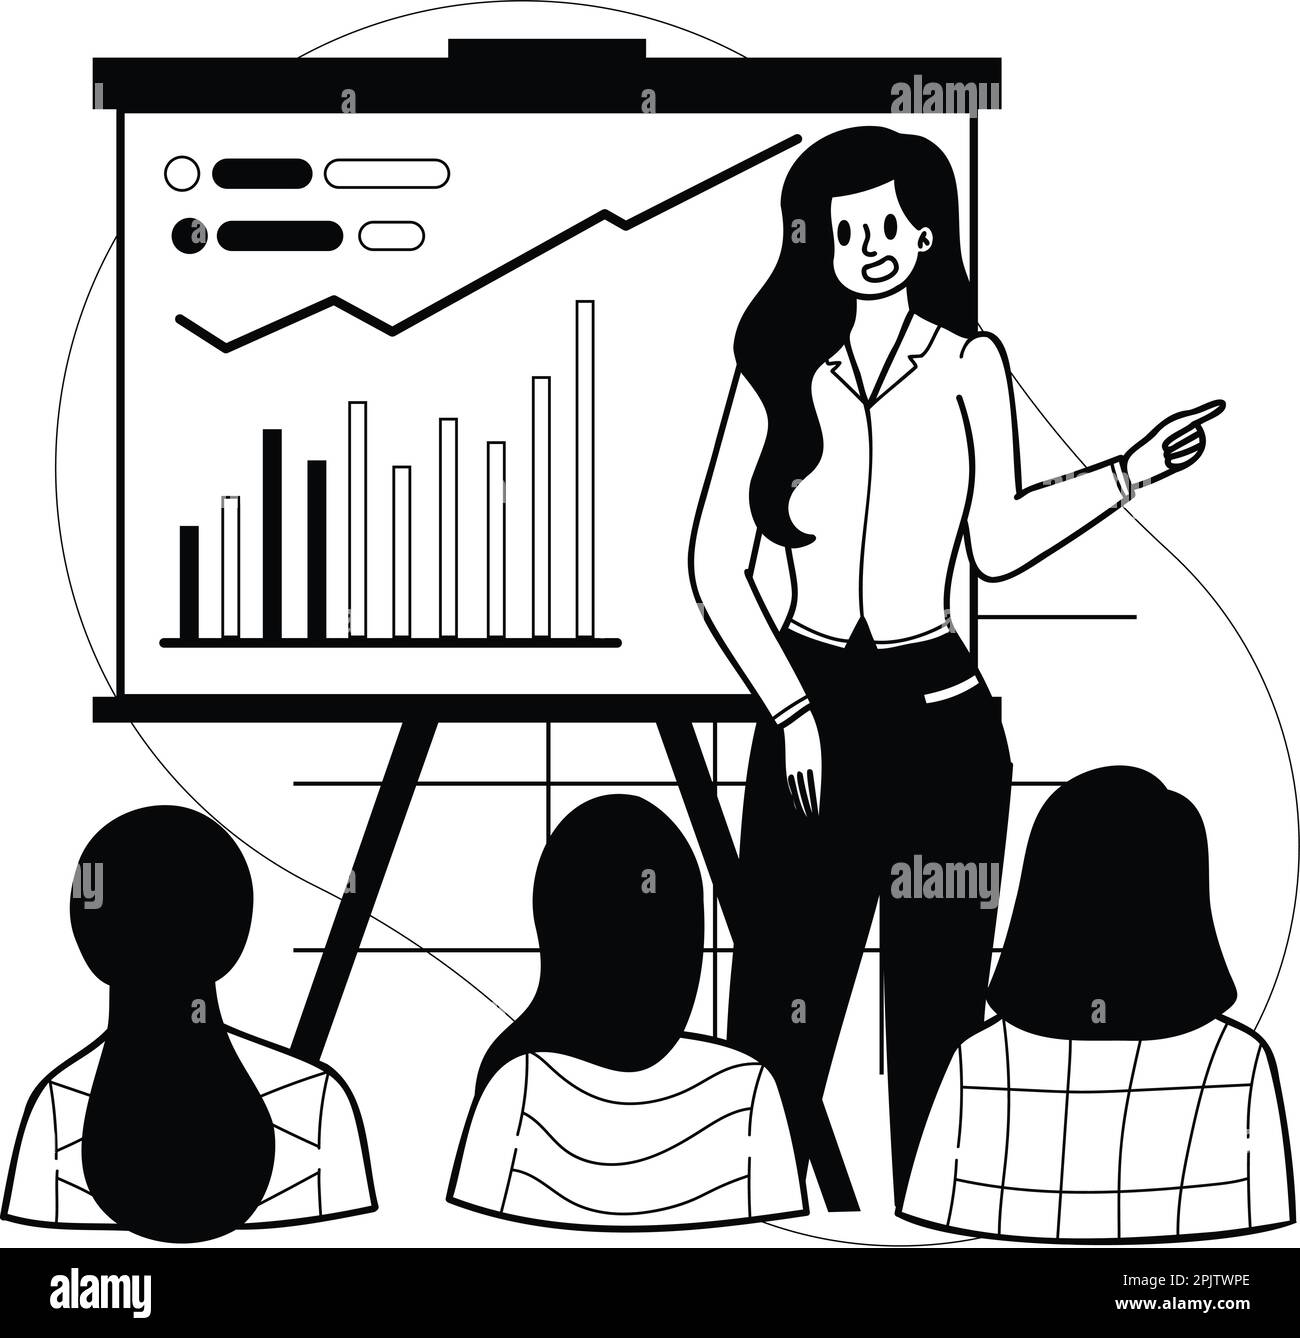 Women Entrepreneurs and Conferences illustration in doodle style isolated on background Stock Vector